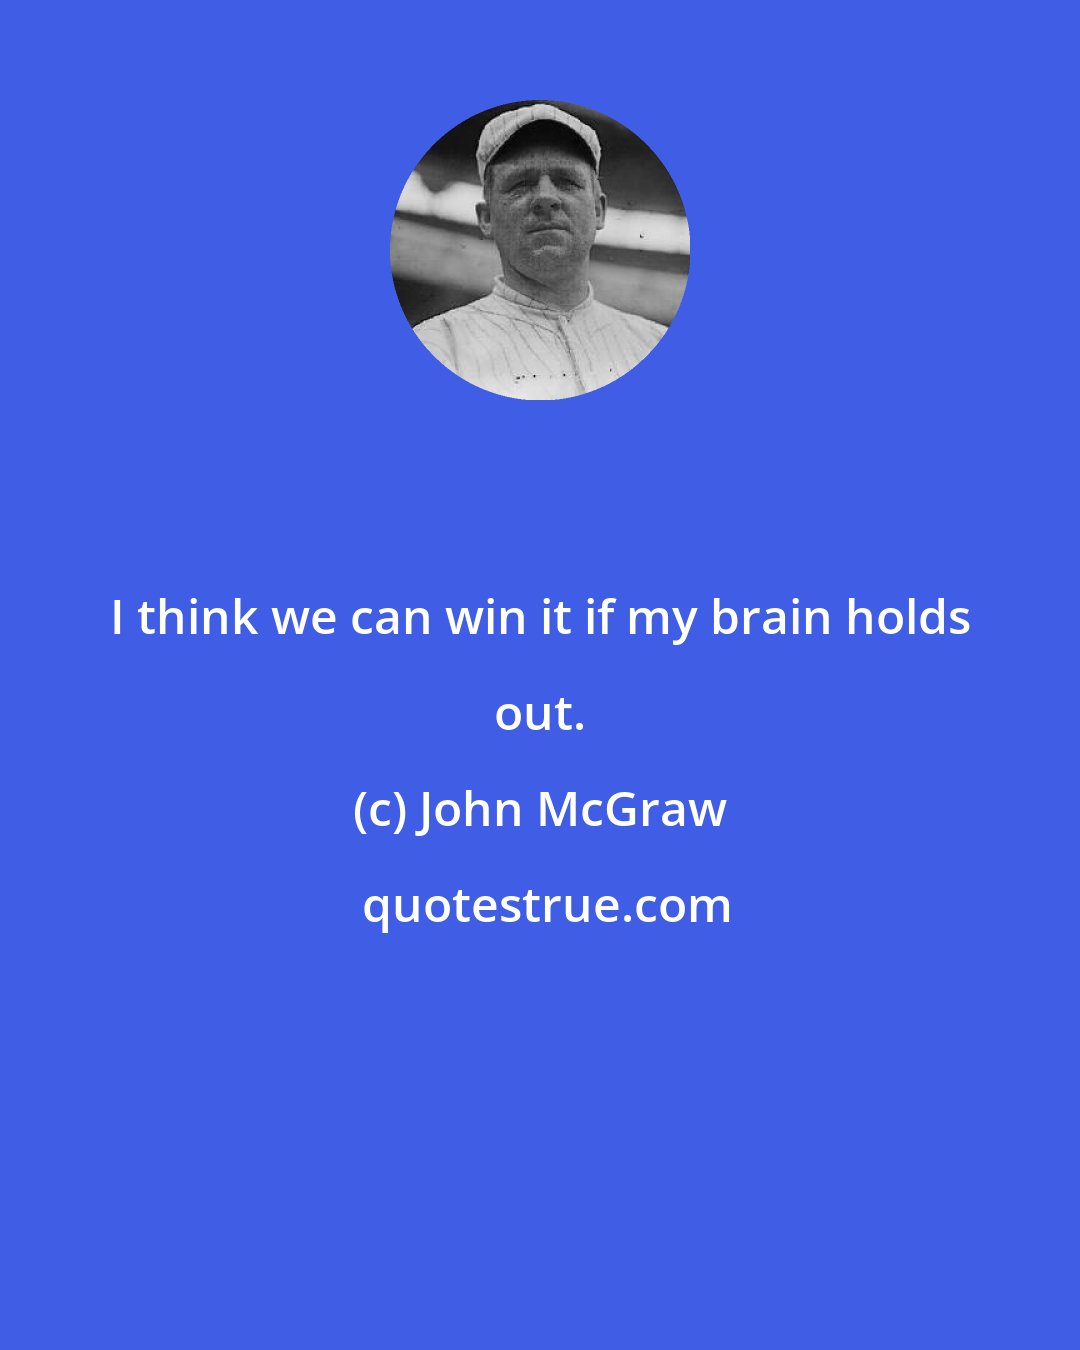 John McGraw: I think we can win it if my brain holds out.